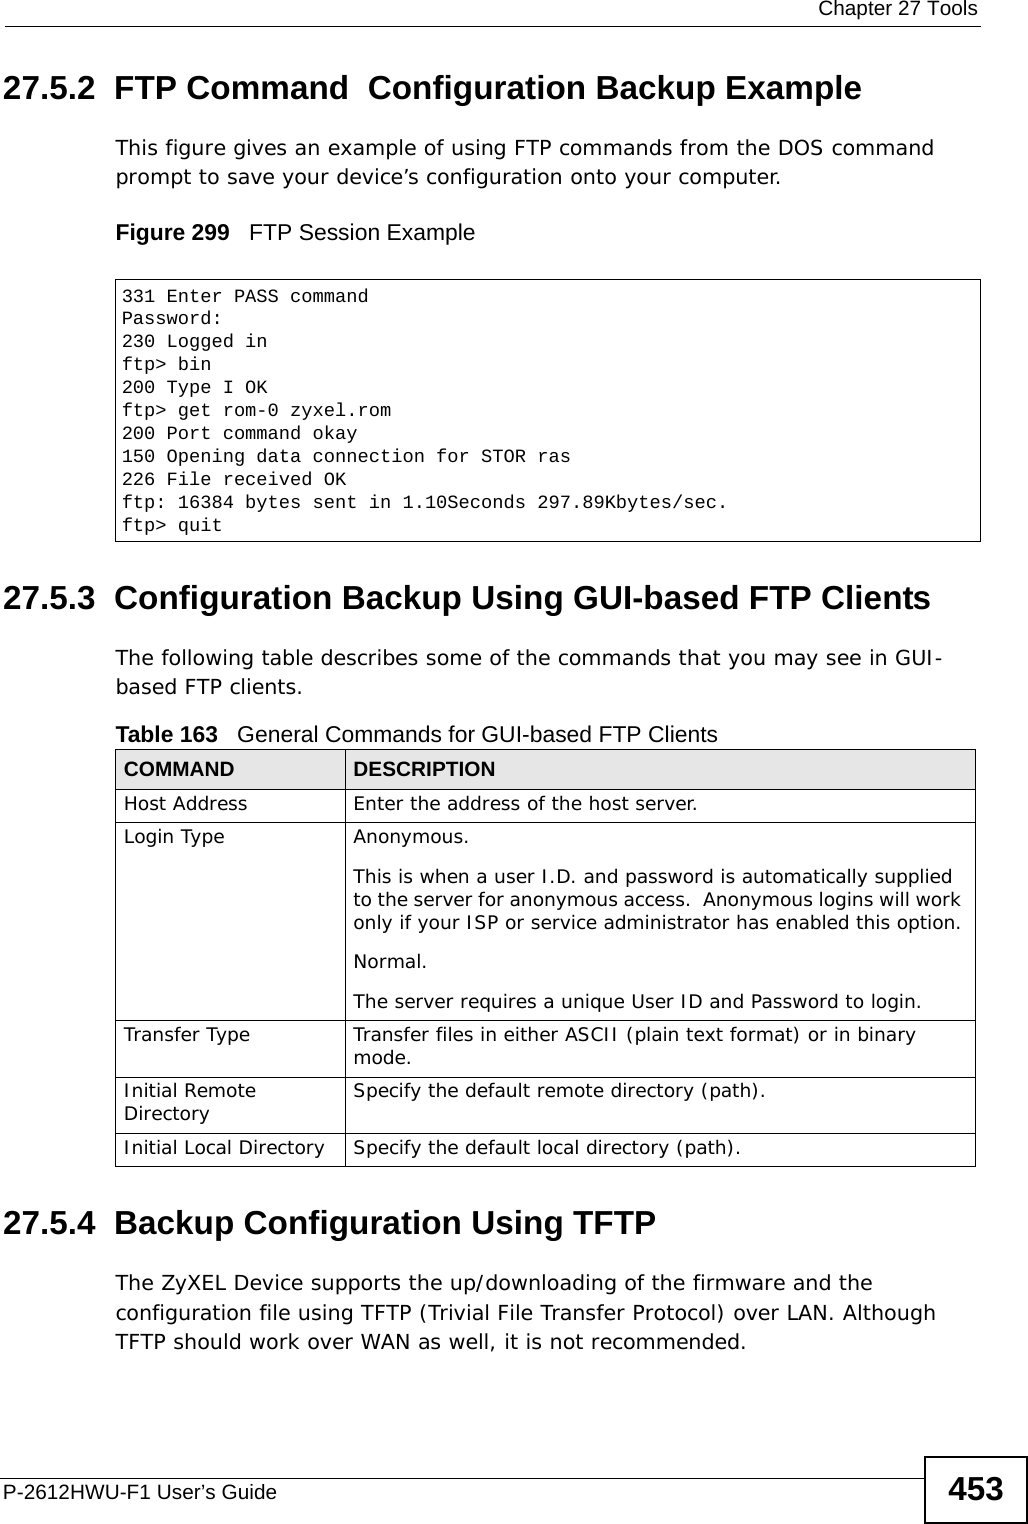  Chapter 27 ToolsP-2612HWU-F1 User’s Guide 45327.5.2  FTP Command  Configuration Backup ExampleThis figure gives an example of using FTP commands from the DOS command prompt to save your device’s configuration onto your computer. Figure 299   FTP Session Example27.5.3  Configuration Backup Using GUI-based FTP ClientsThe following table describes some of the commands that you may see in GUI-based FTP clients.27.5.4  Backup Configuration Using TFTPThe ZyXEL Device supports the up/downloading of the firmware and the configuration file using TFTP (Trivial File Transfer Protocol) over LAN. Although TFTP should work over WAN as well, it is not recommended.331 Enter PASS commandPassword:230 Logged inftp&gt; bin200 Type I OKftp&gt; get rom-0 zyxel.rom200 Port command okay150 Opening data connection for STOR ras226 File received OKftp: 16384 bytes sent in 1.10Seconds 297.89Kbytes/sec.ftp&gt; quitTable 163   General Commands for GUI-based FTP ClientsCOMMAND DESCRIPTIONHost Address Enter the address of the host server.Login Type Anonymous.This is when a user I.D. and password is automatically supplied to the server for anonymous access.  Anonymous logins will work only if your ISP or service administrator has enabled this option.Normal.  The server requires a unique User ID and Password to login.Transfer Type Transfer files in either ASCII (plain text format) or in binary mode.Initial Remote Directory Specify the default remote directory (path).Initial Local Directory Specify the default local directory (path).